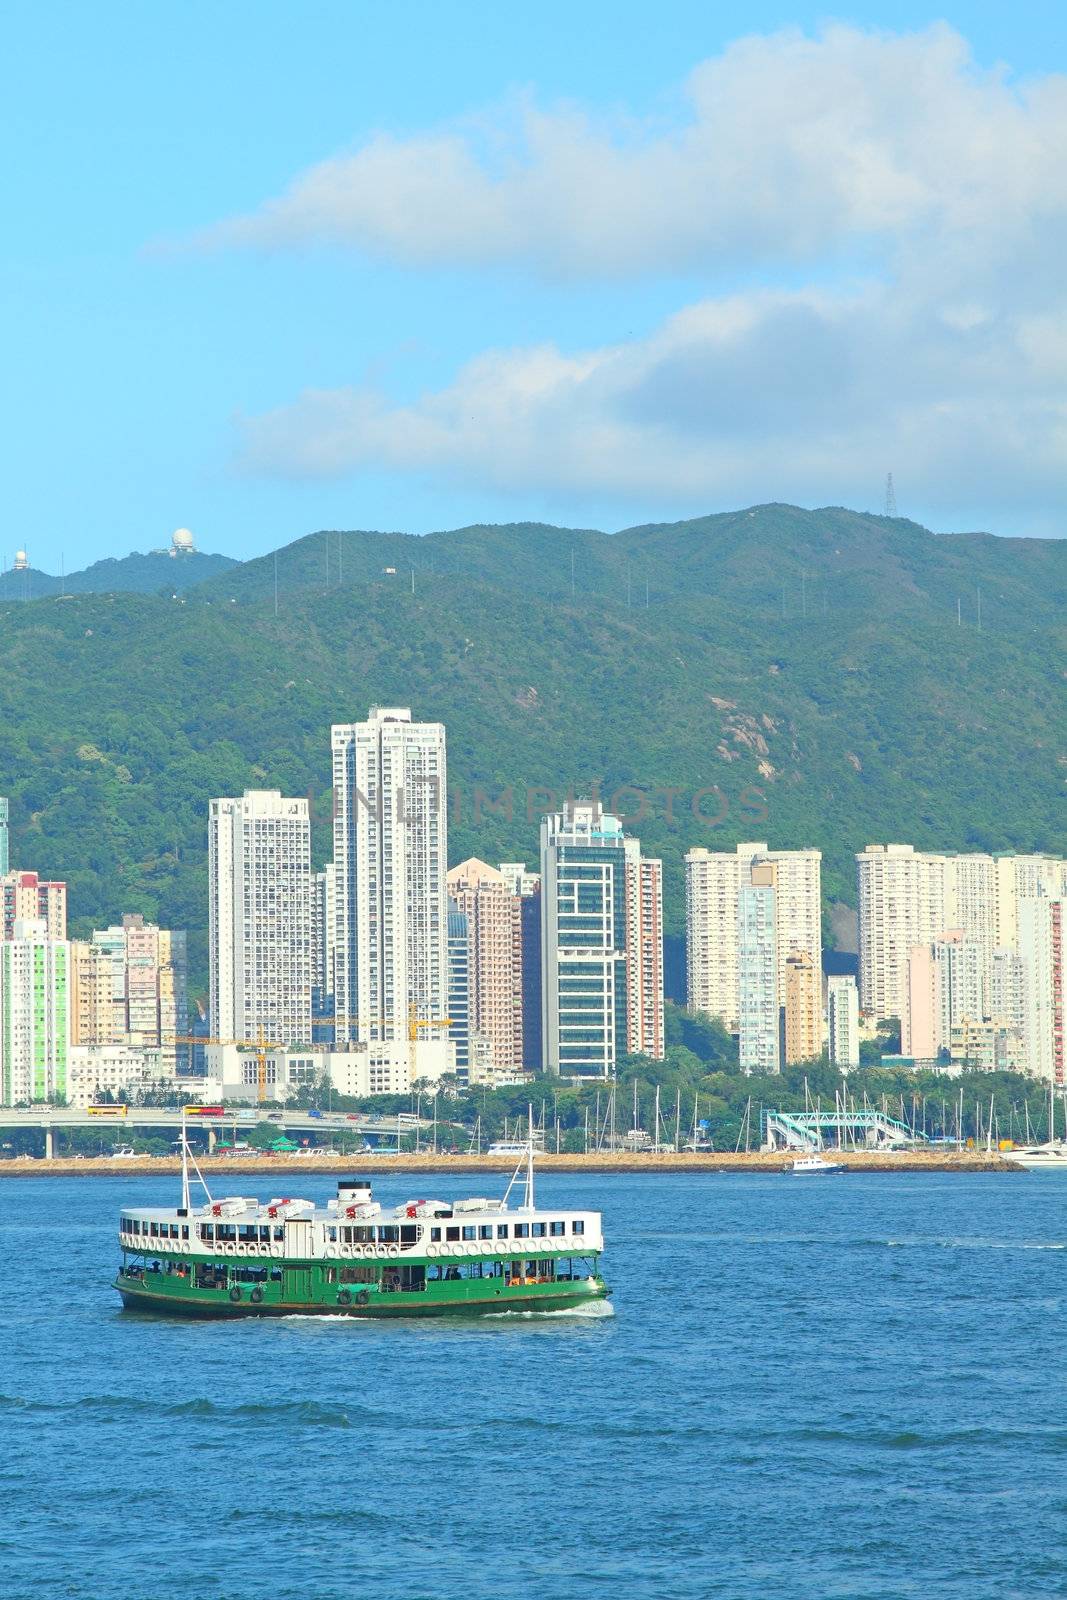 Star Ferry in Hong Kong. It is one of the oldest transportation in Hong Kong for more than 120 years. 